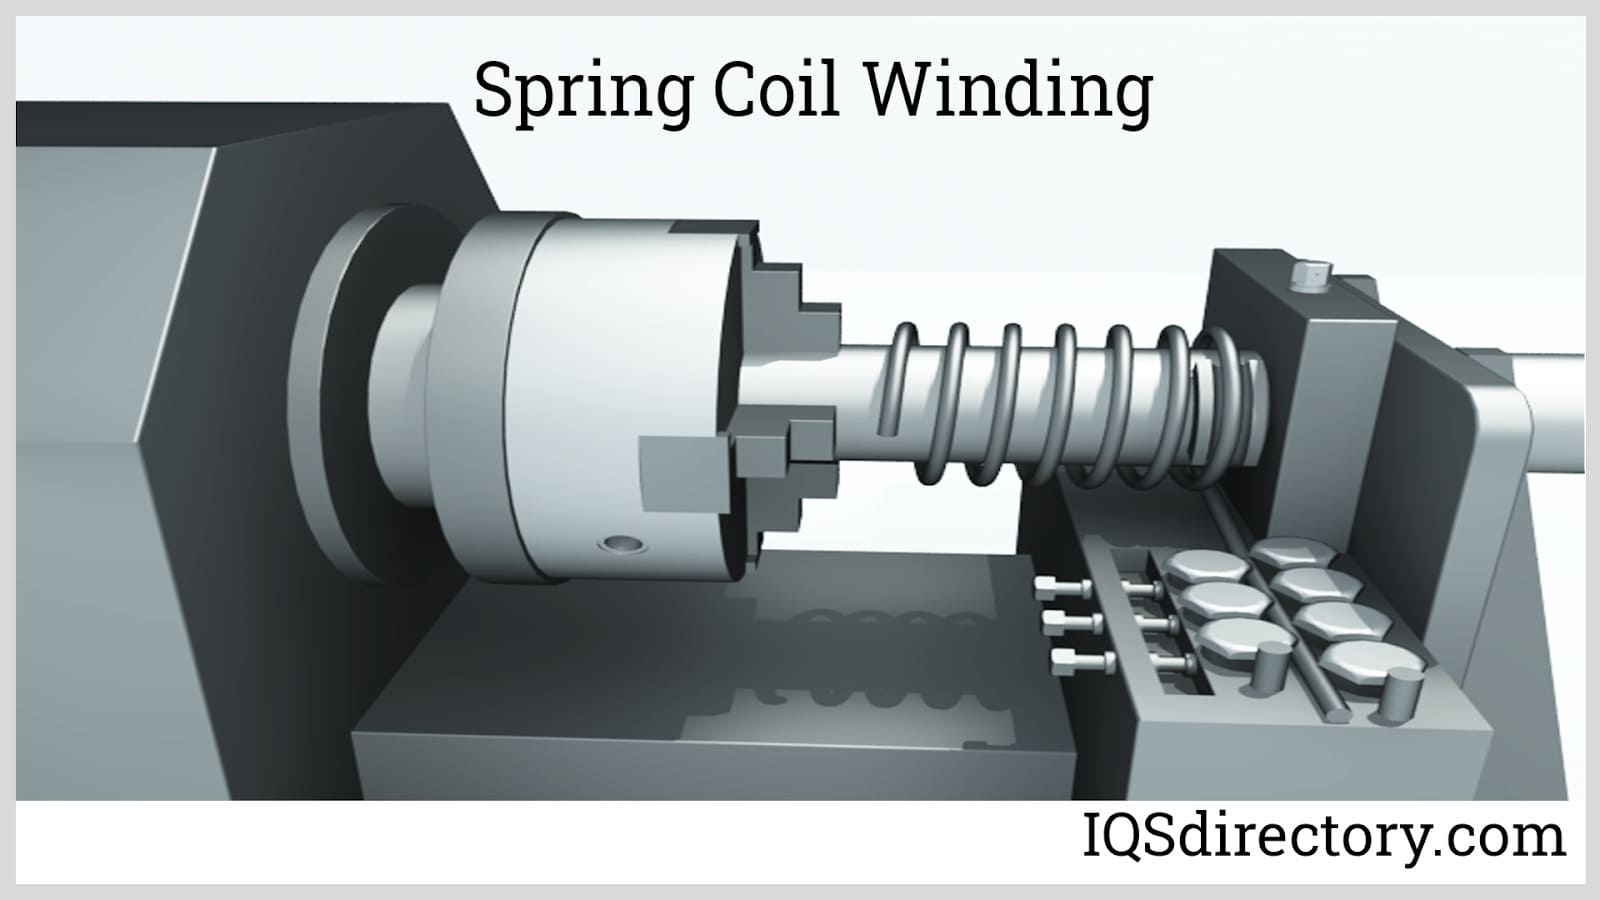 Spring Coil Winding